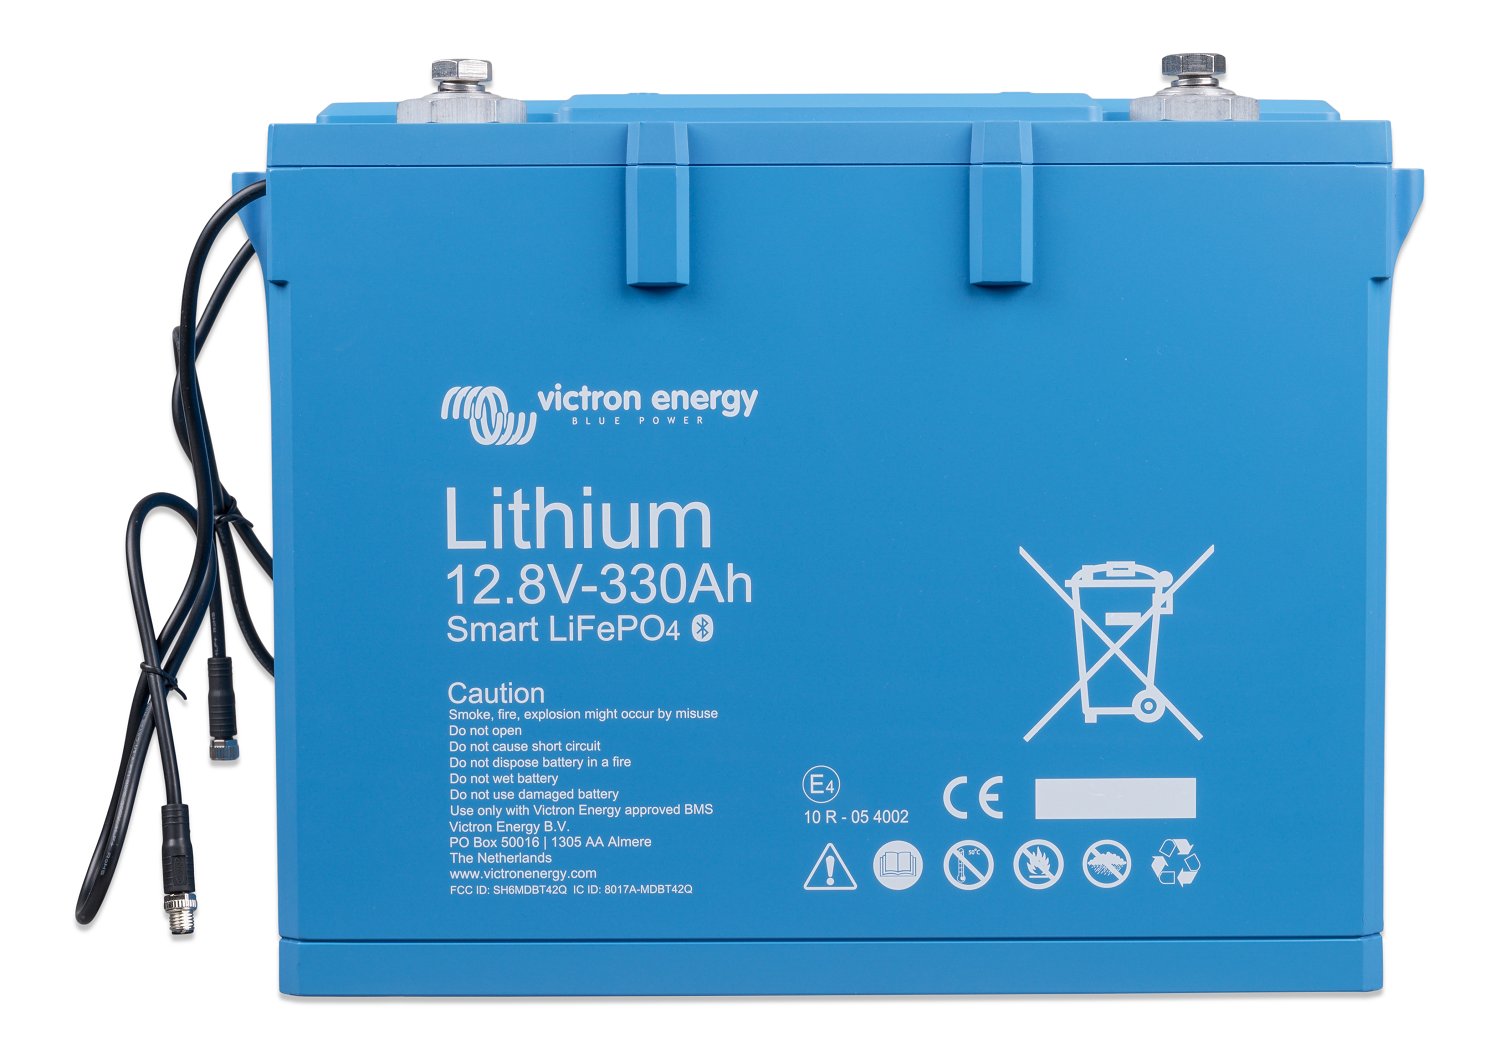 What is the weight of Victron batteries I'm considering to purchase?